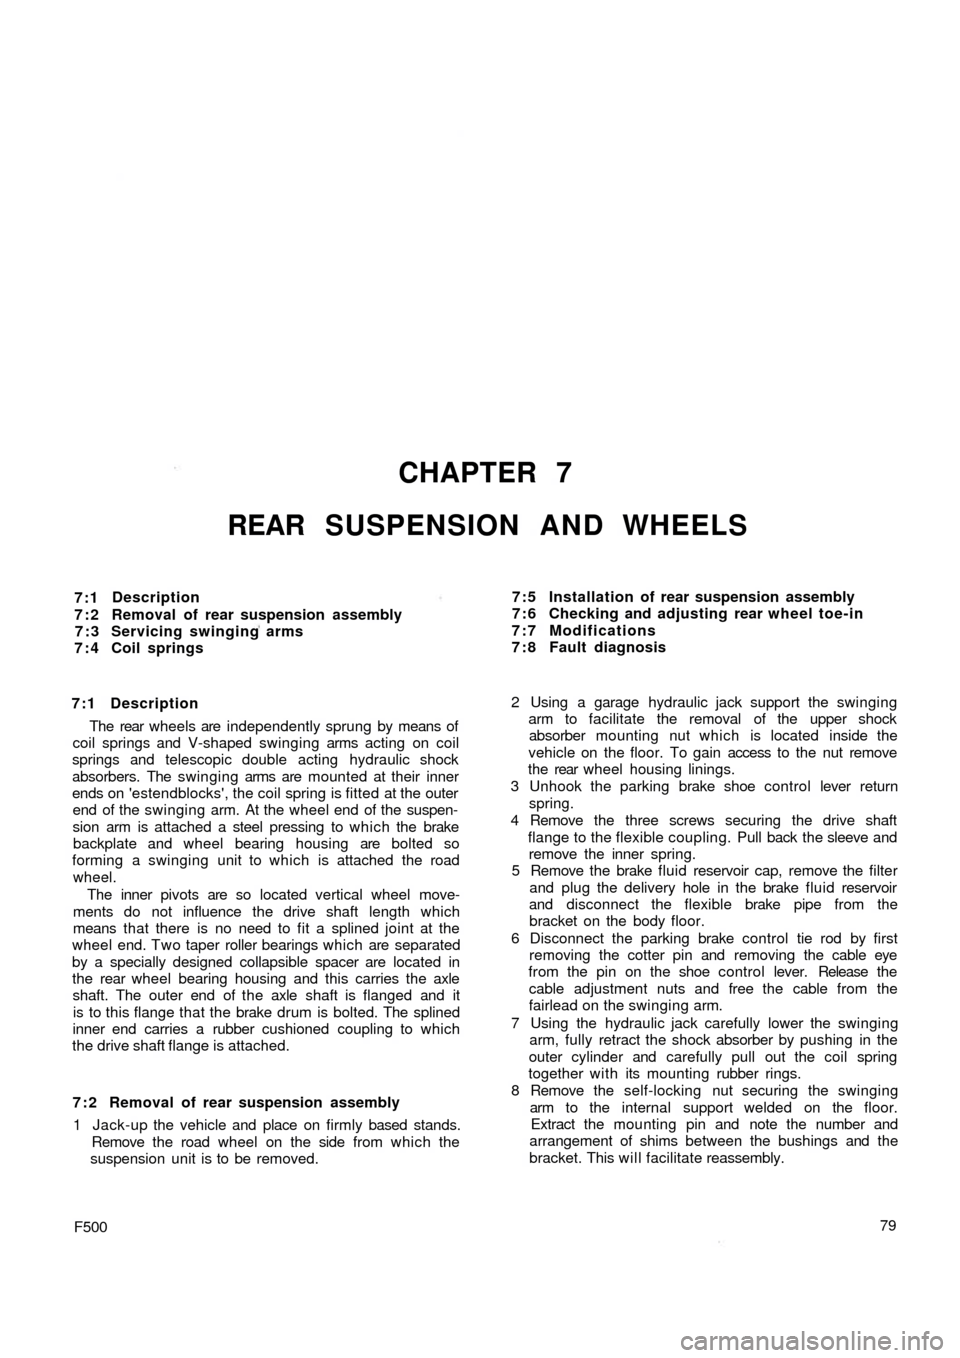 FIAT 500 1968 1.G Workshop Manual CHAPTER 7
REAR SUSPENSION AND WHEELS
7:1
7:2
7:3
7:4Description
Removal of rear suspension assembly
Servicing swinging arms
Coil springs
7:1 Description
The  rear  wheels are independently sprung by m